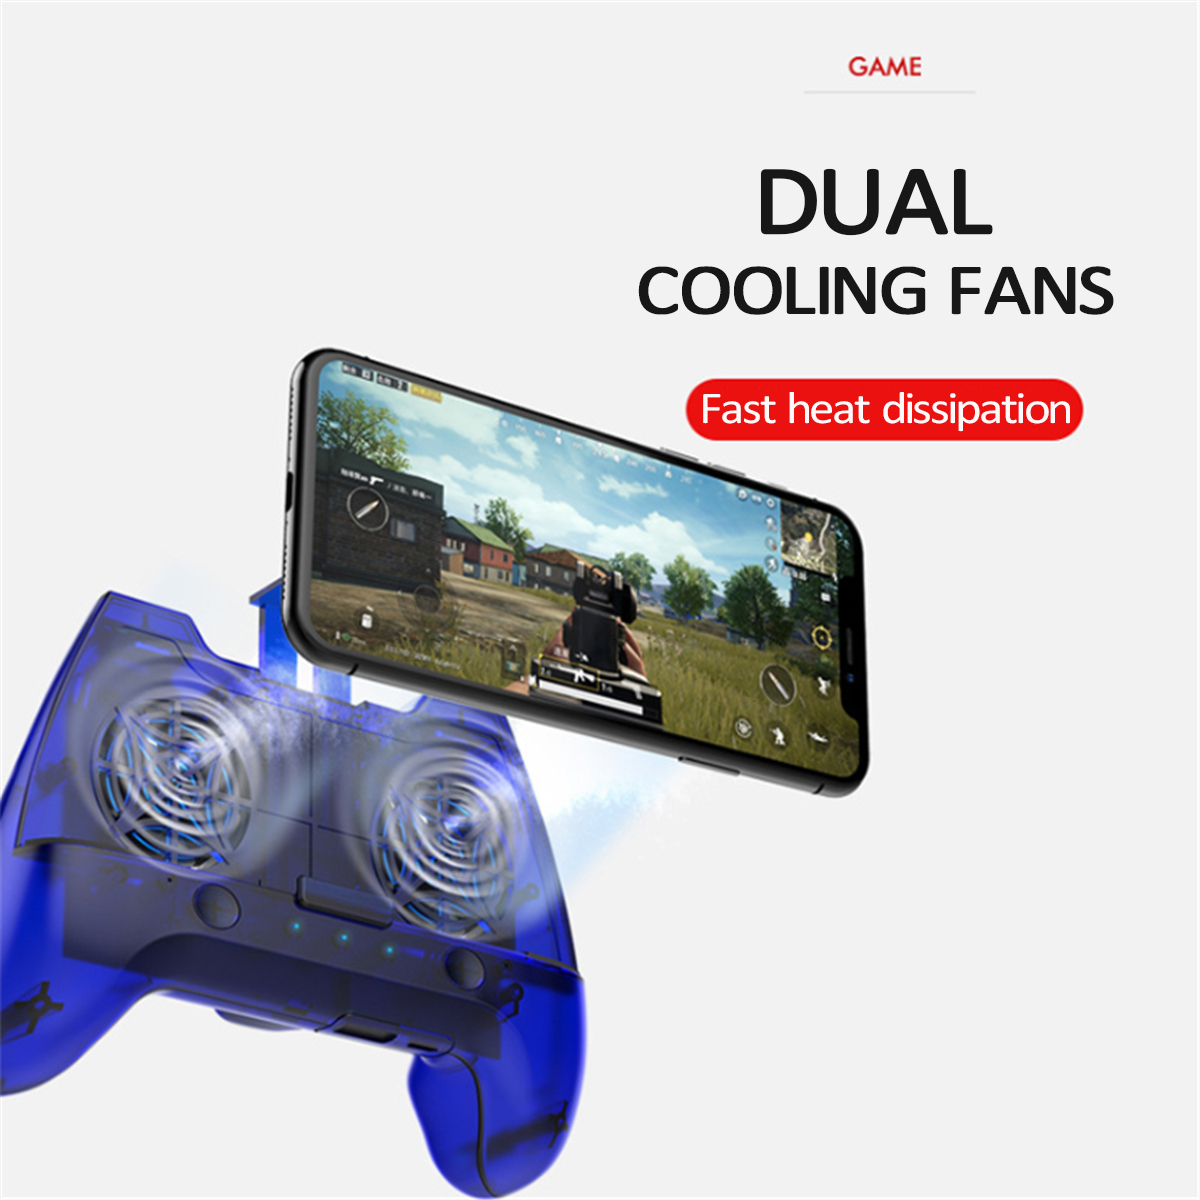 Wireless-bluetooth-Gamepad-Game-Controller-Joystick-Cooling-Fan-for-PUBG-Android-IOS-Mobile-Phone-1461047-4